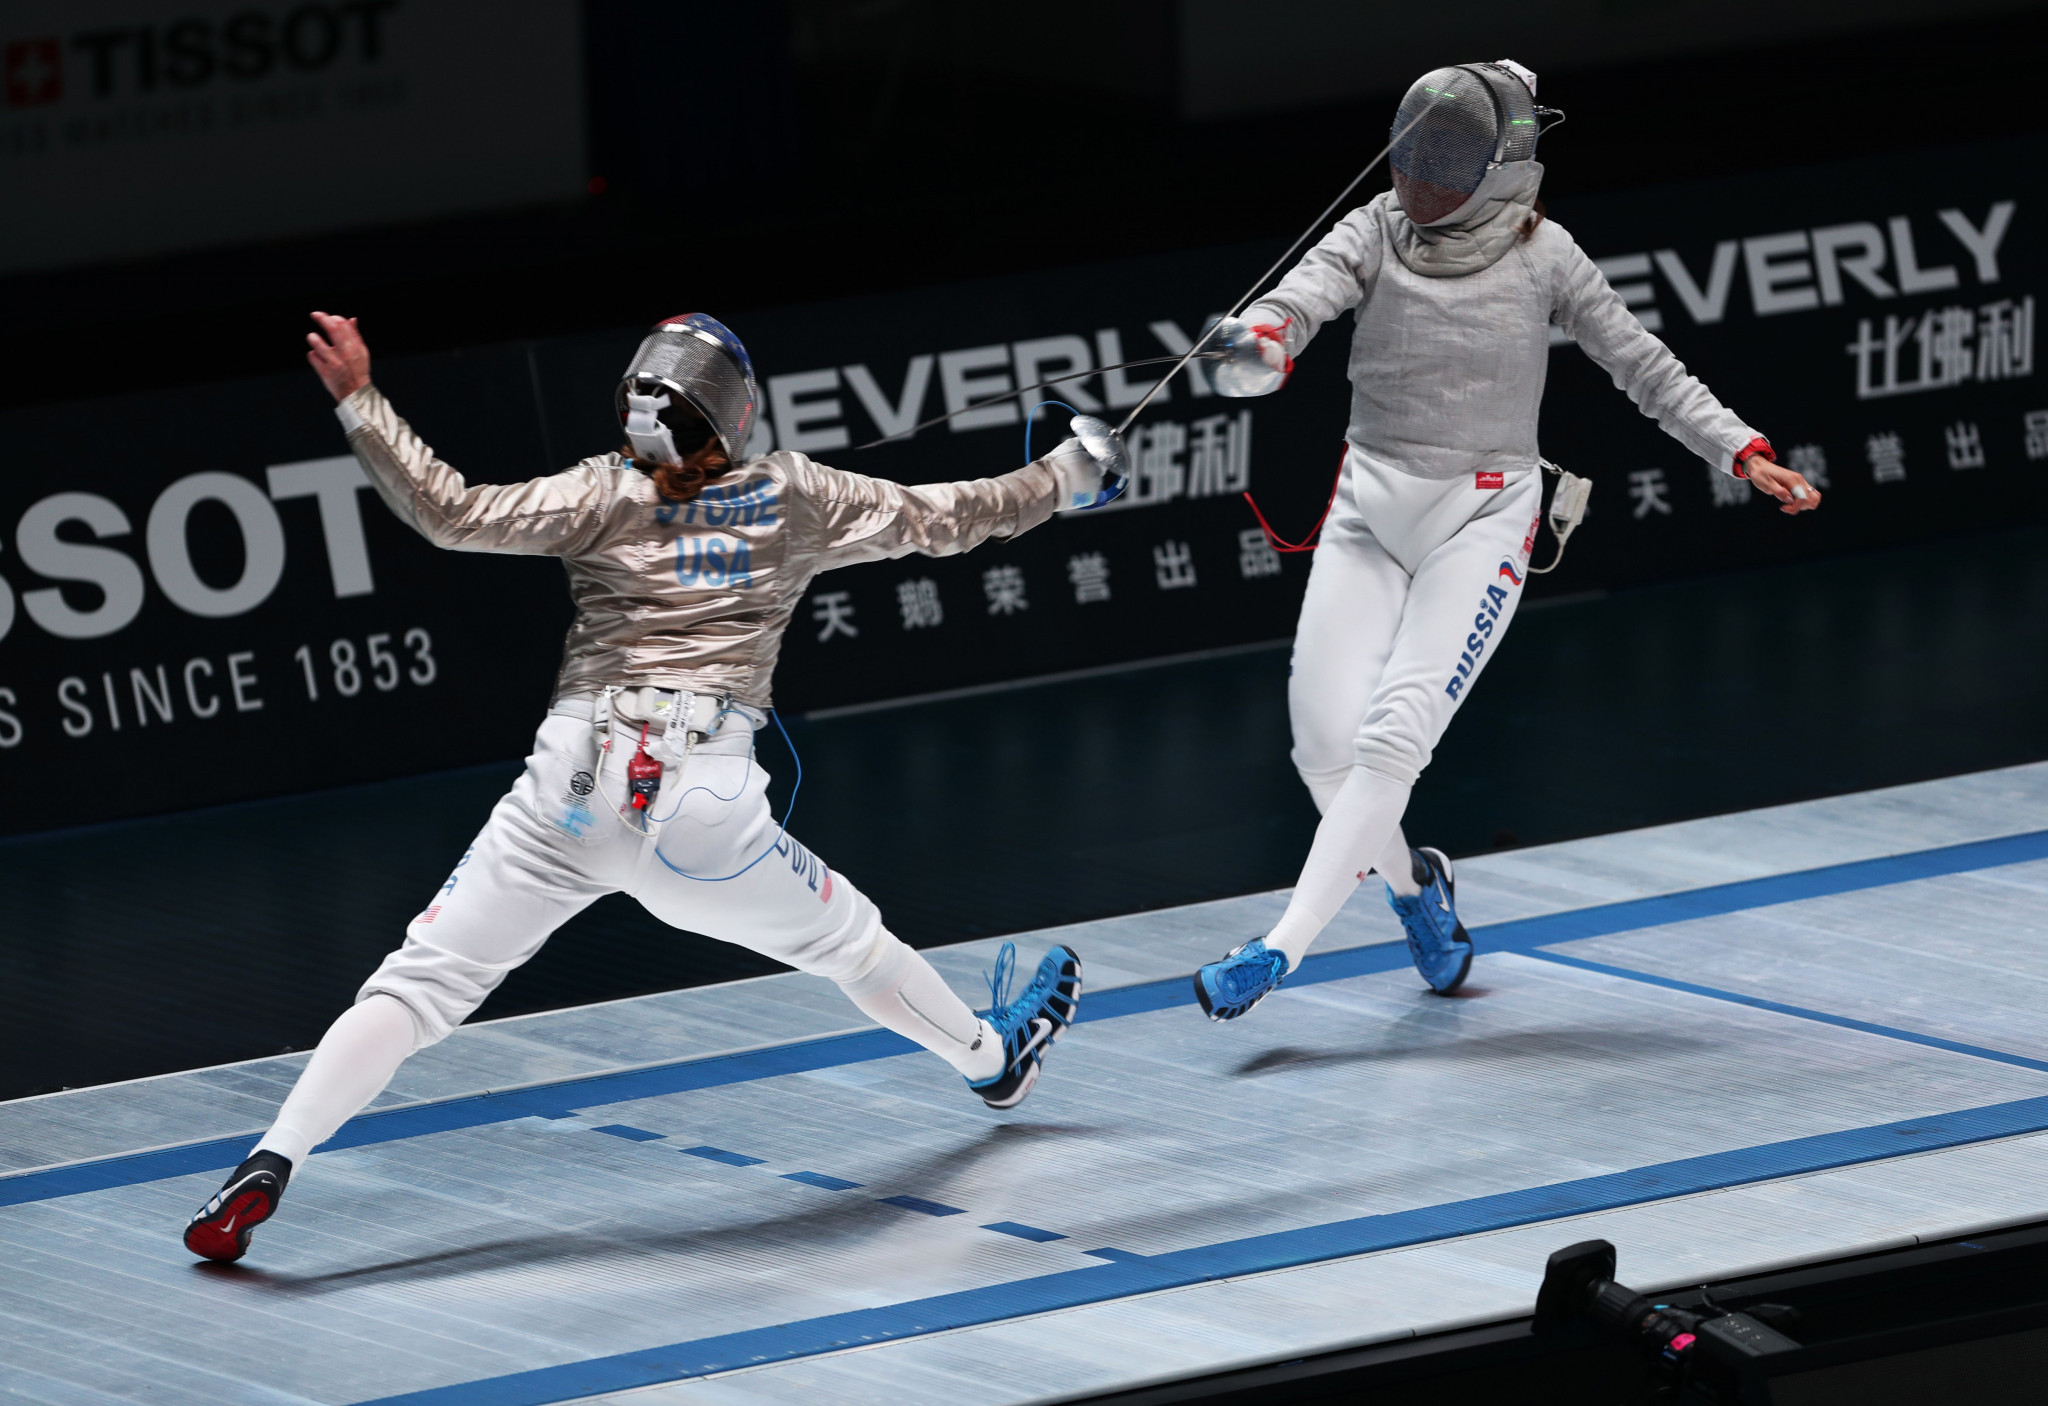 Eliza Stone delivered a fifth gold medal for the United States at the Pan American Fencing Championships in Toronto ©Getty Images